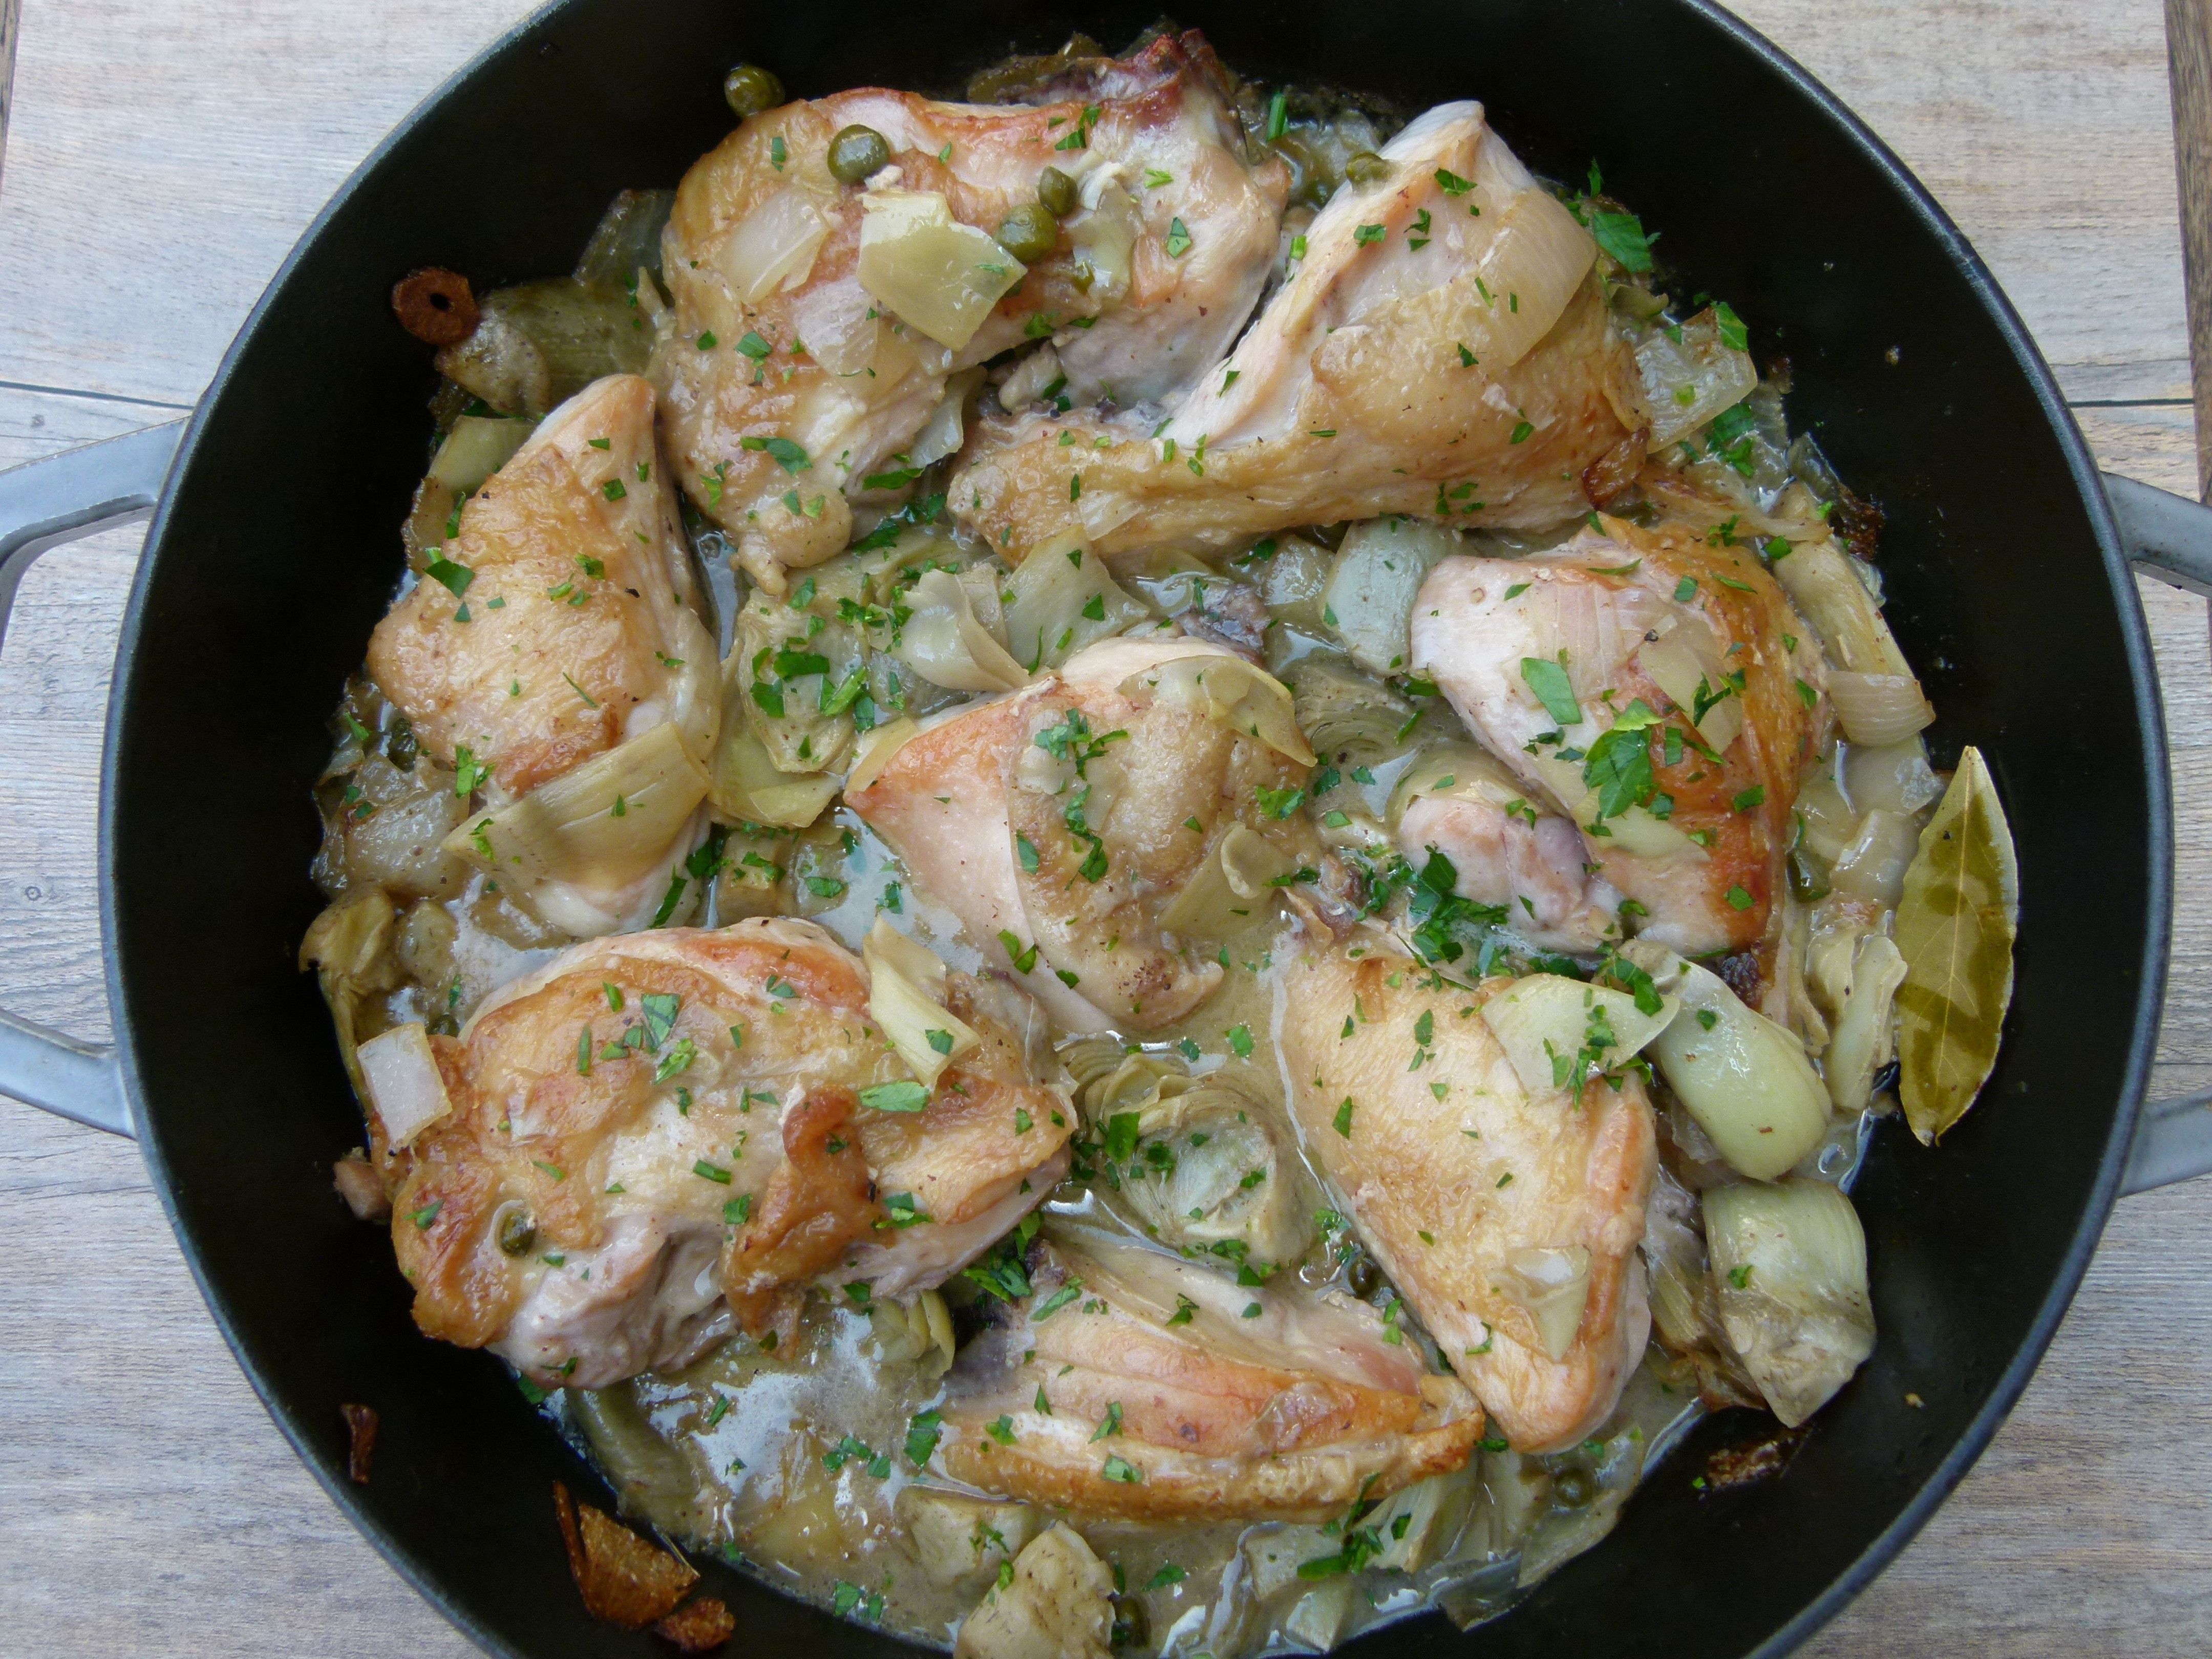 Healthy Baked Chicken Recipes
 Healthy Baked Chicken Recipe with Artichokes and Capers